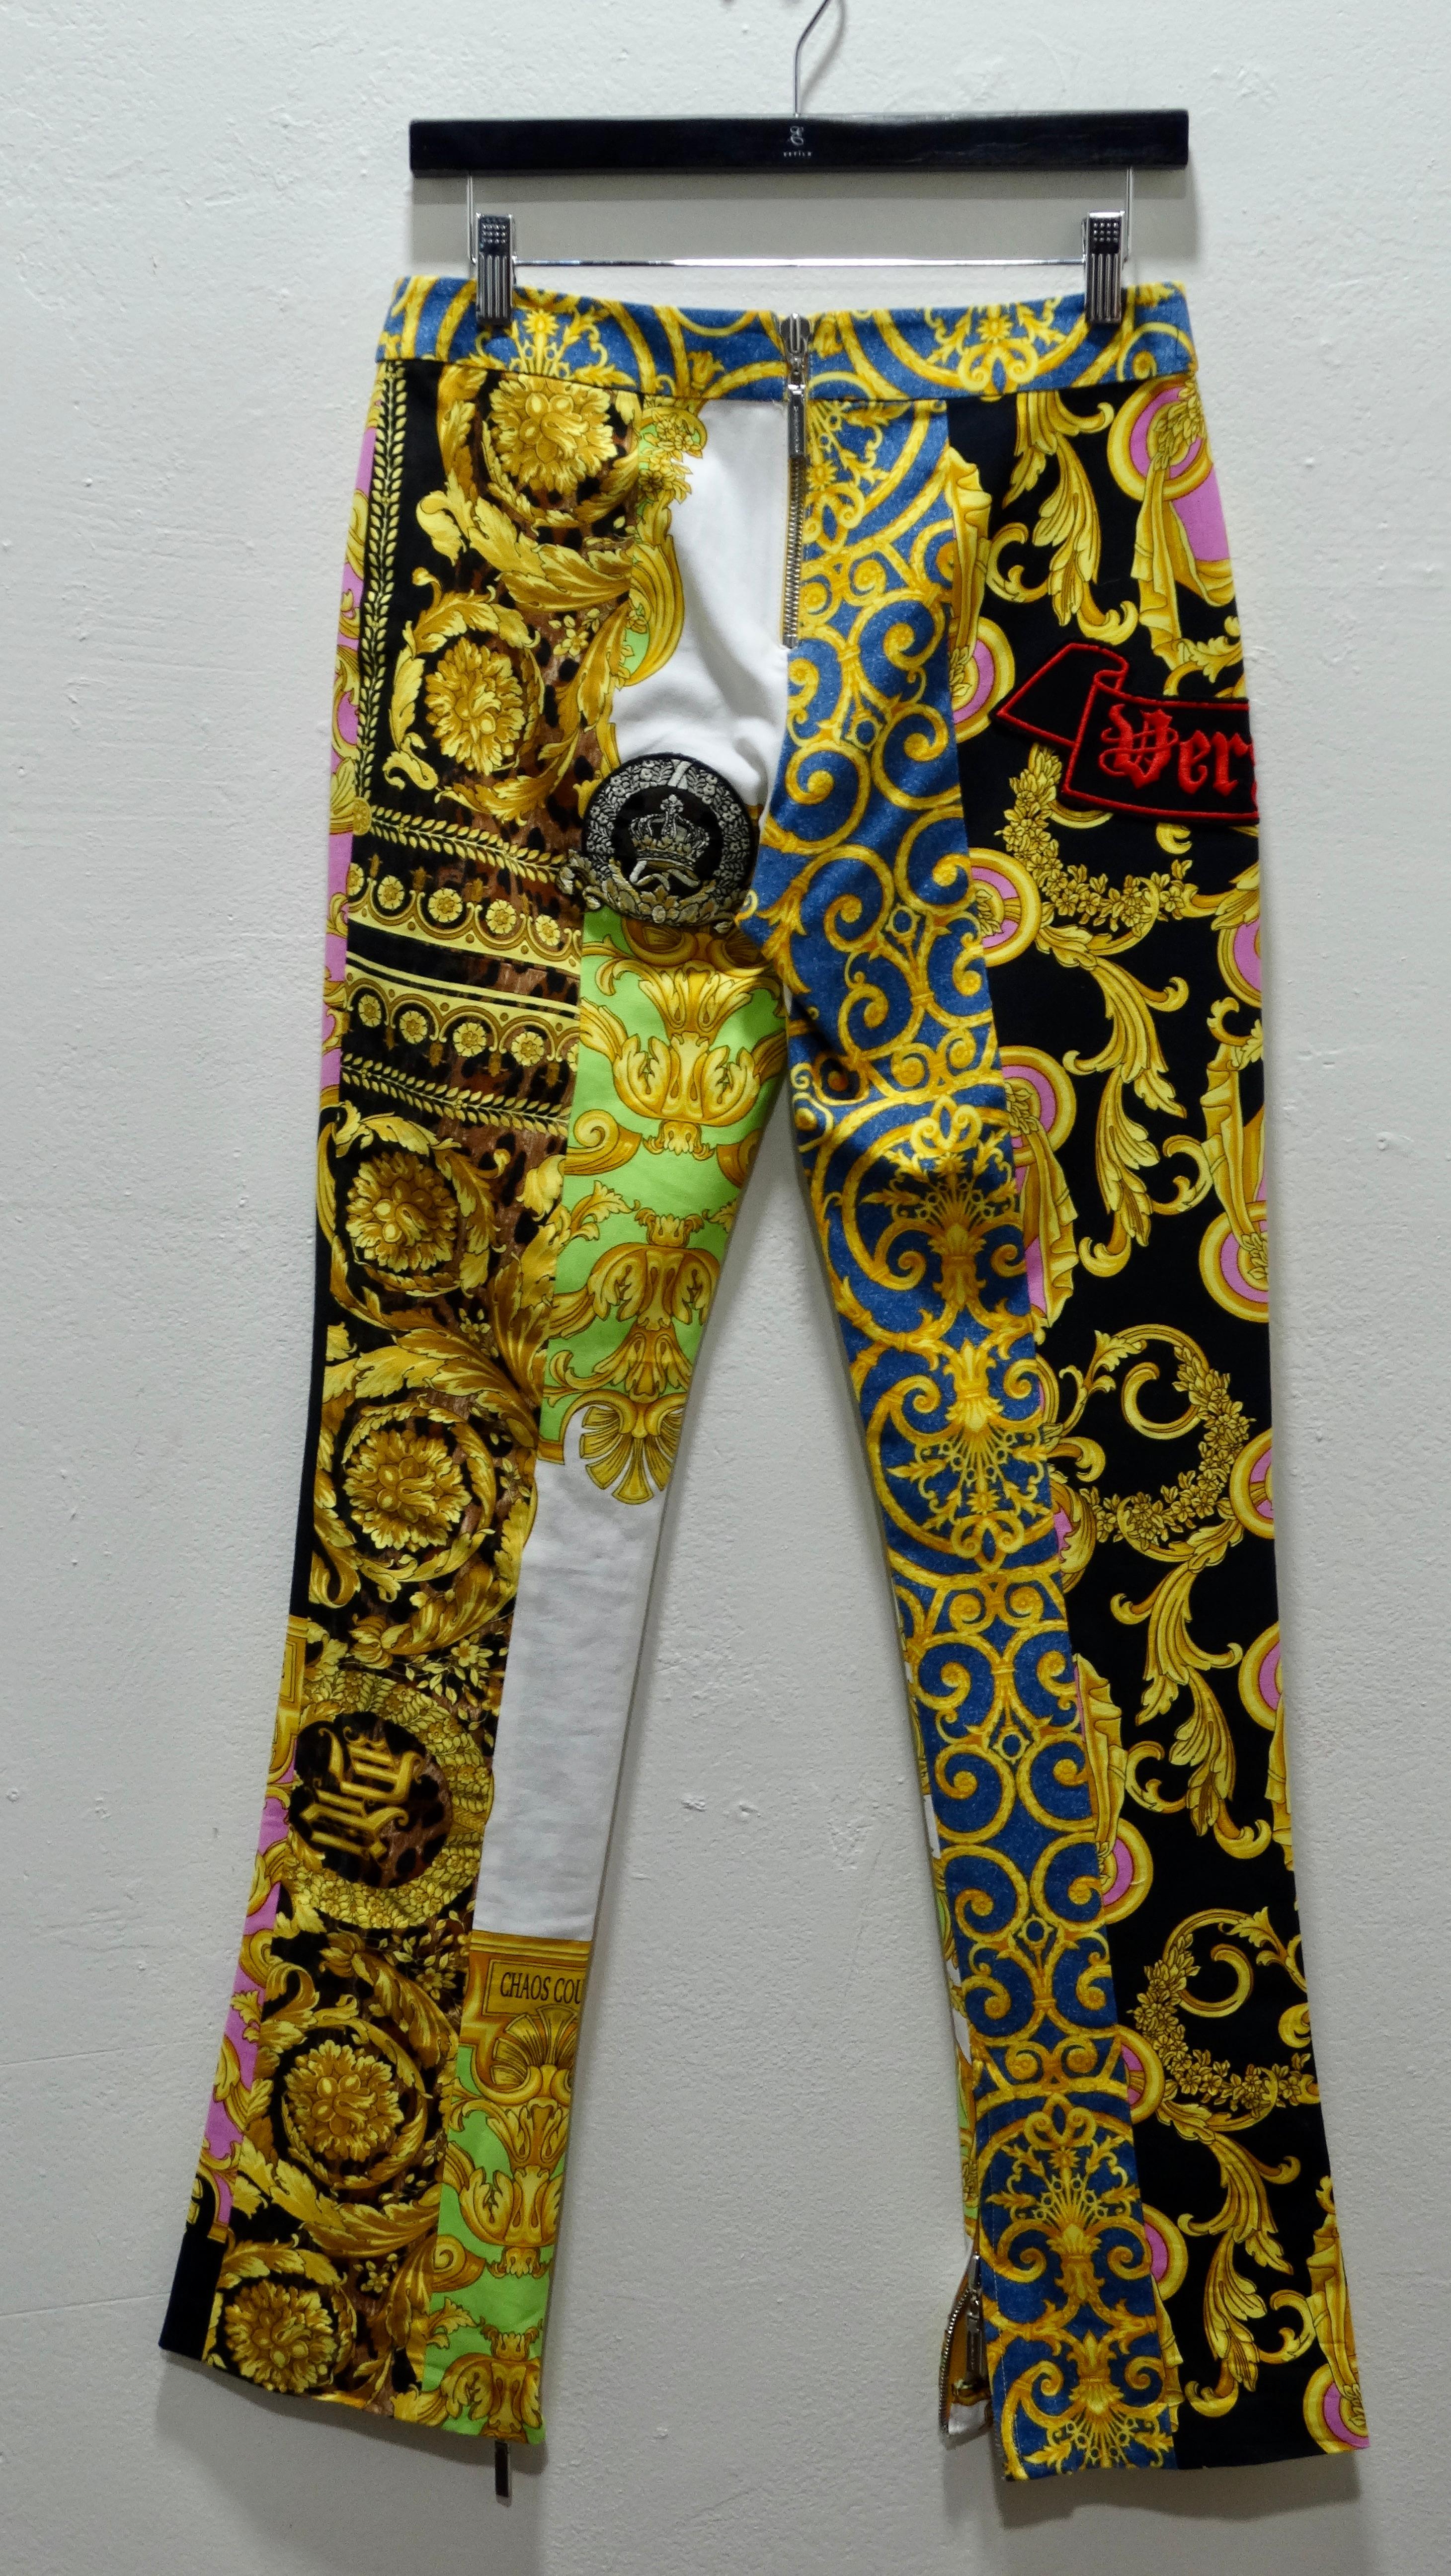 The statement pant you never knew you needed! These funky baroque patchwork pants from the 90's by Gianni Versace are the perfect statement pant for your collection! The bright pinks and golds beautifully compliment the blues and blacks making it